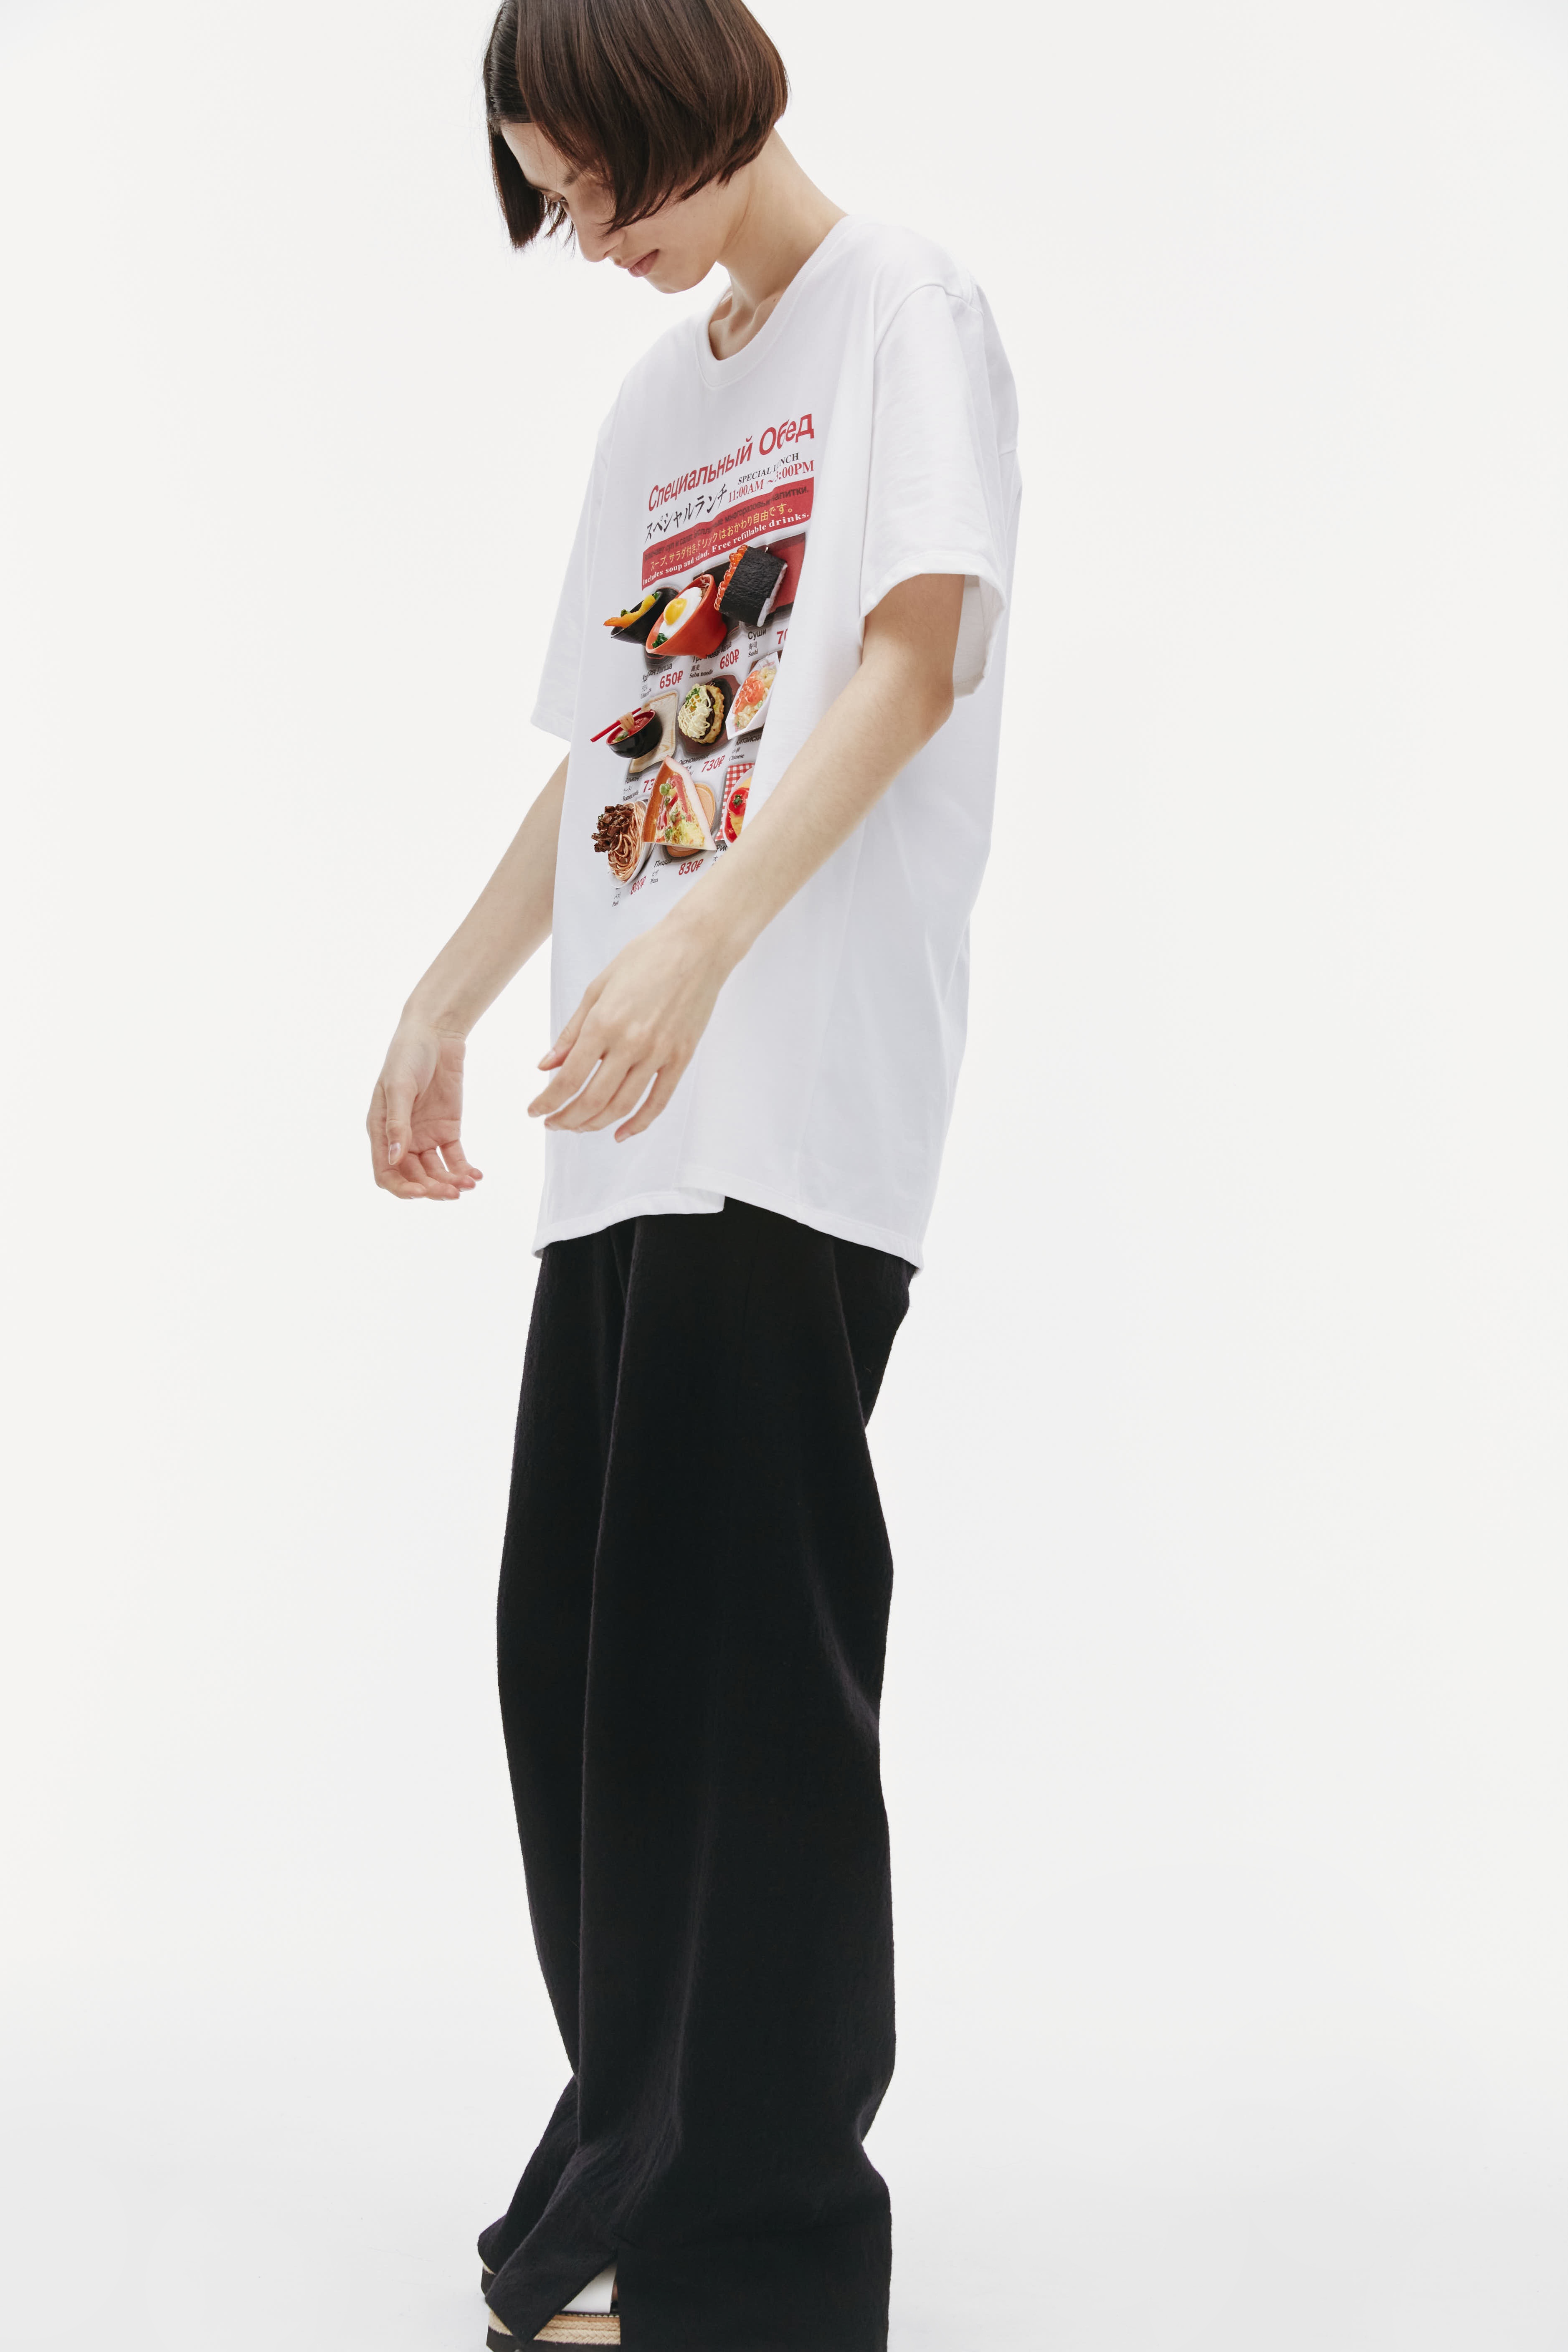 DOUBLET X SVMOSCOW T-SHIRT - 4